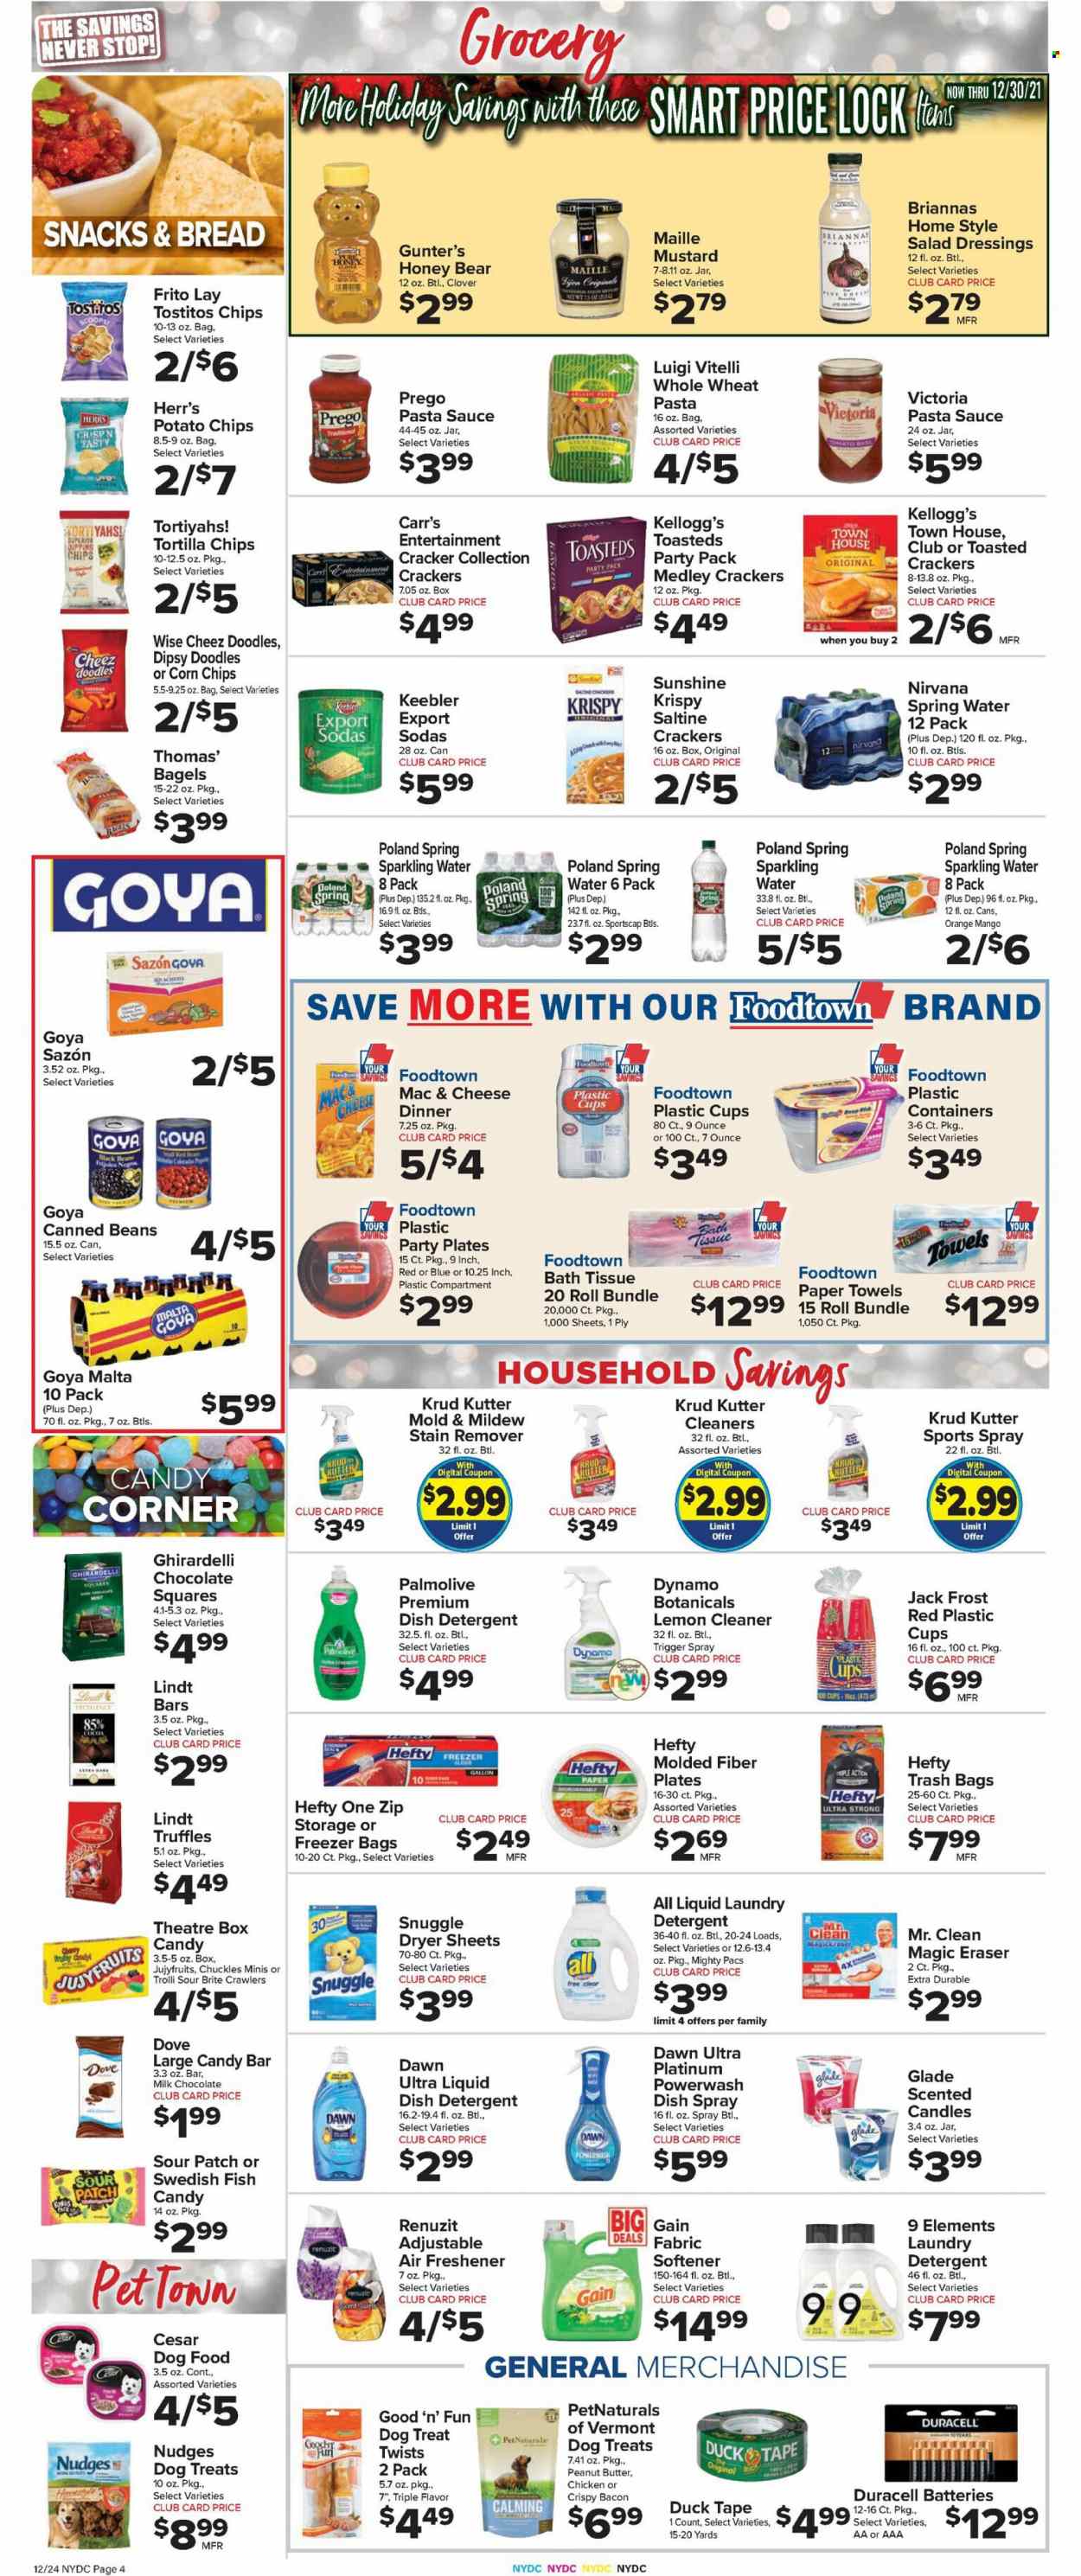 thumbnail - Foodtown Flyer - 12/24/2021 - 12/30/2021 - Sales products - bagels, bread, beans, snack, macaroni & cheese, pasta sauce, sauce, Clover, Sunshine, Dove, milk chocolate, Trolli, Lindt, truffles, crackers, Kellogg's, Ghirardelli, Keebler, Sour Patch, candy bar, sweets, bars, lollies, tortilla chips, potato chips, corn chips, Tostitos, salty snack, Goya, mustard, salad dressing, dressing, spring water, soda, sparkling water, water, poultry meat, bath tissue, kitchen towels, paper towels, detergent, Gain, cleaner, stain remover, Snuggle, fabric softener, laundry detergent, dryer sheets, dishwashing liquid, Palmolive, Brite, Hefty, trash bags, plate, container, freezer bag, candle, Renuzit, air freshener, Glade, scented candle, plastic cup, battery, Duracell, aa batteries, animal food, animal treats, dog food, Good 'n' Fun, dog treat. Page 6.